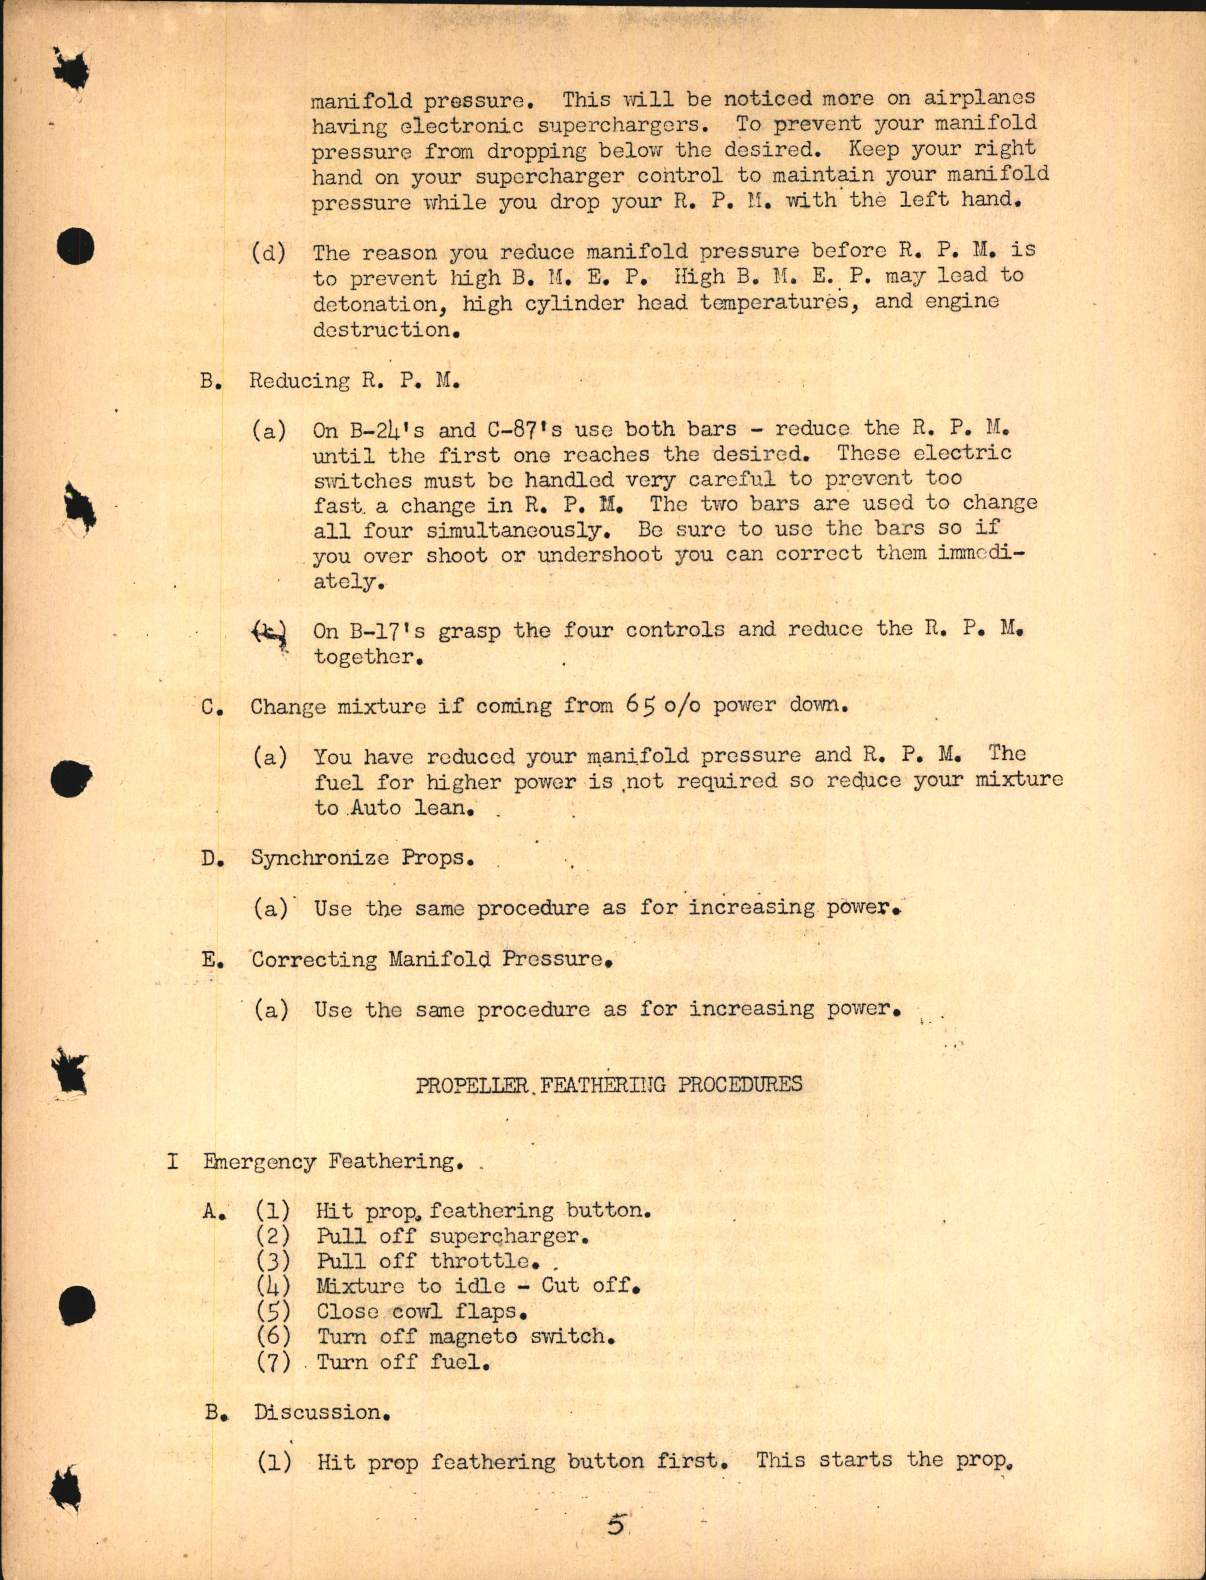 Sample page 7 from AirCorps Library document: Primary Flight Instructions for B-24, C-87, and B-17, Flight Engineer Division